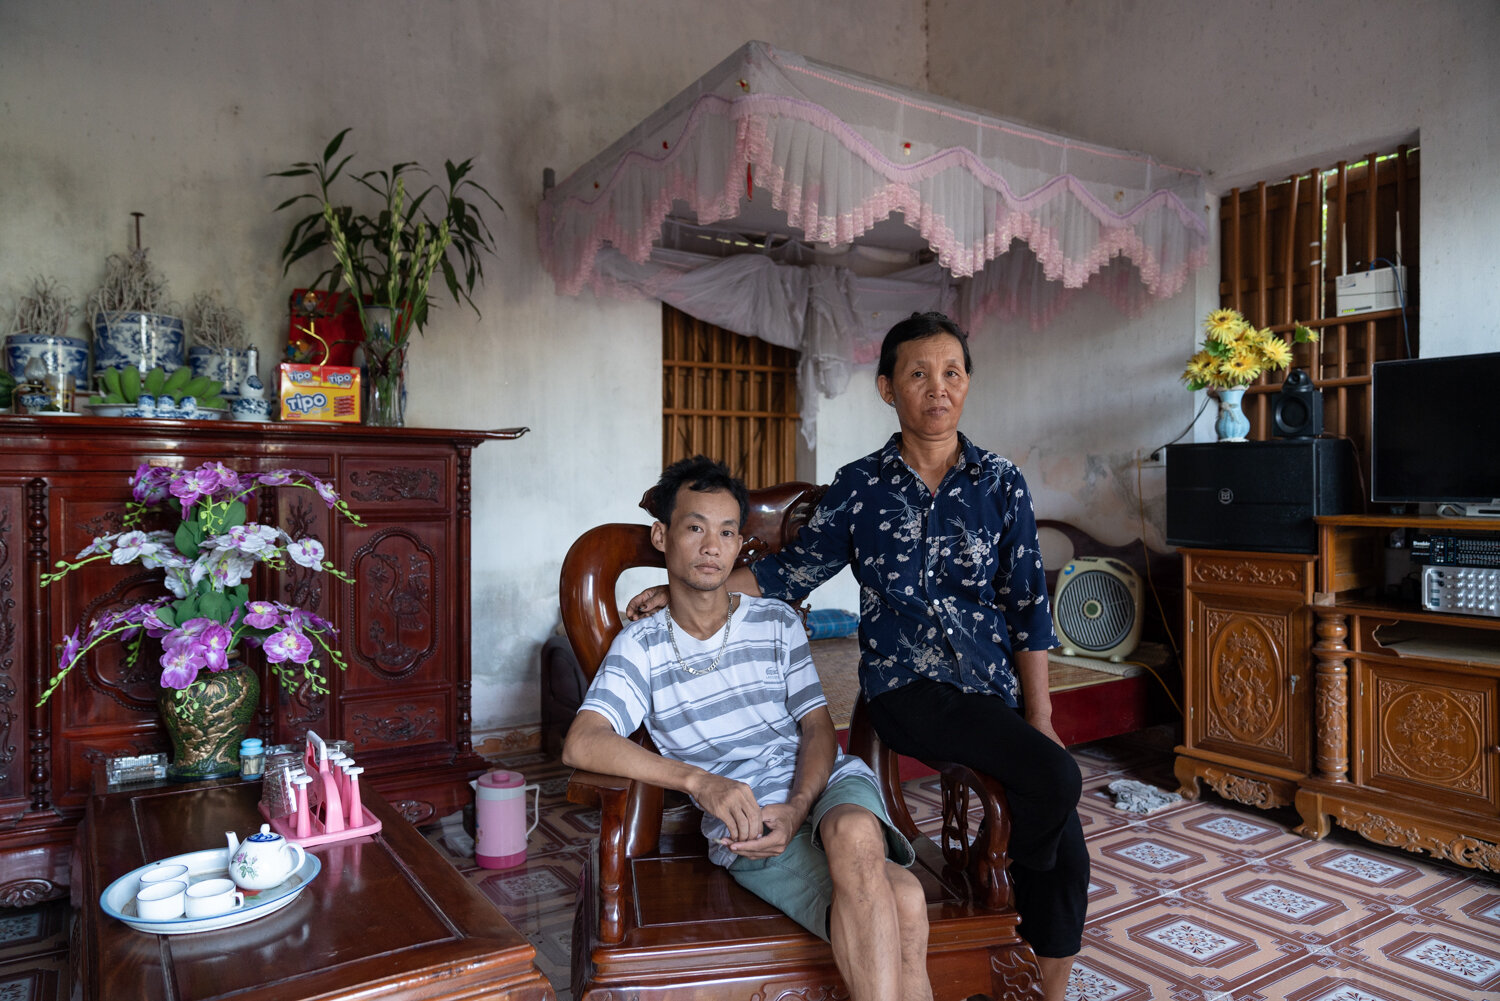  July 16, 2019 - Hung Yen, Vietnam. VUONG QUOC Nhat (30) and his mother THI LIEN Mon Le (56). Nhat was diagnosed with kidney failure. The family started to contribute to VSS health insurance after he got sick. He is waiting on a kidney transplant. © 